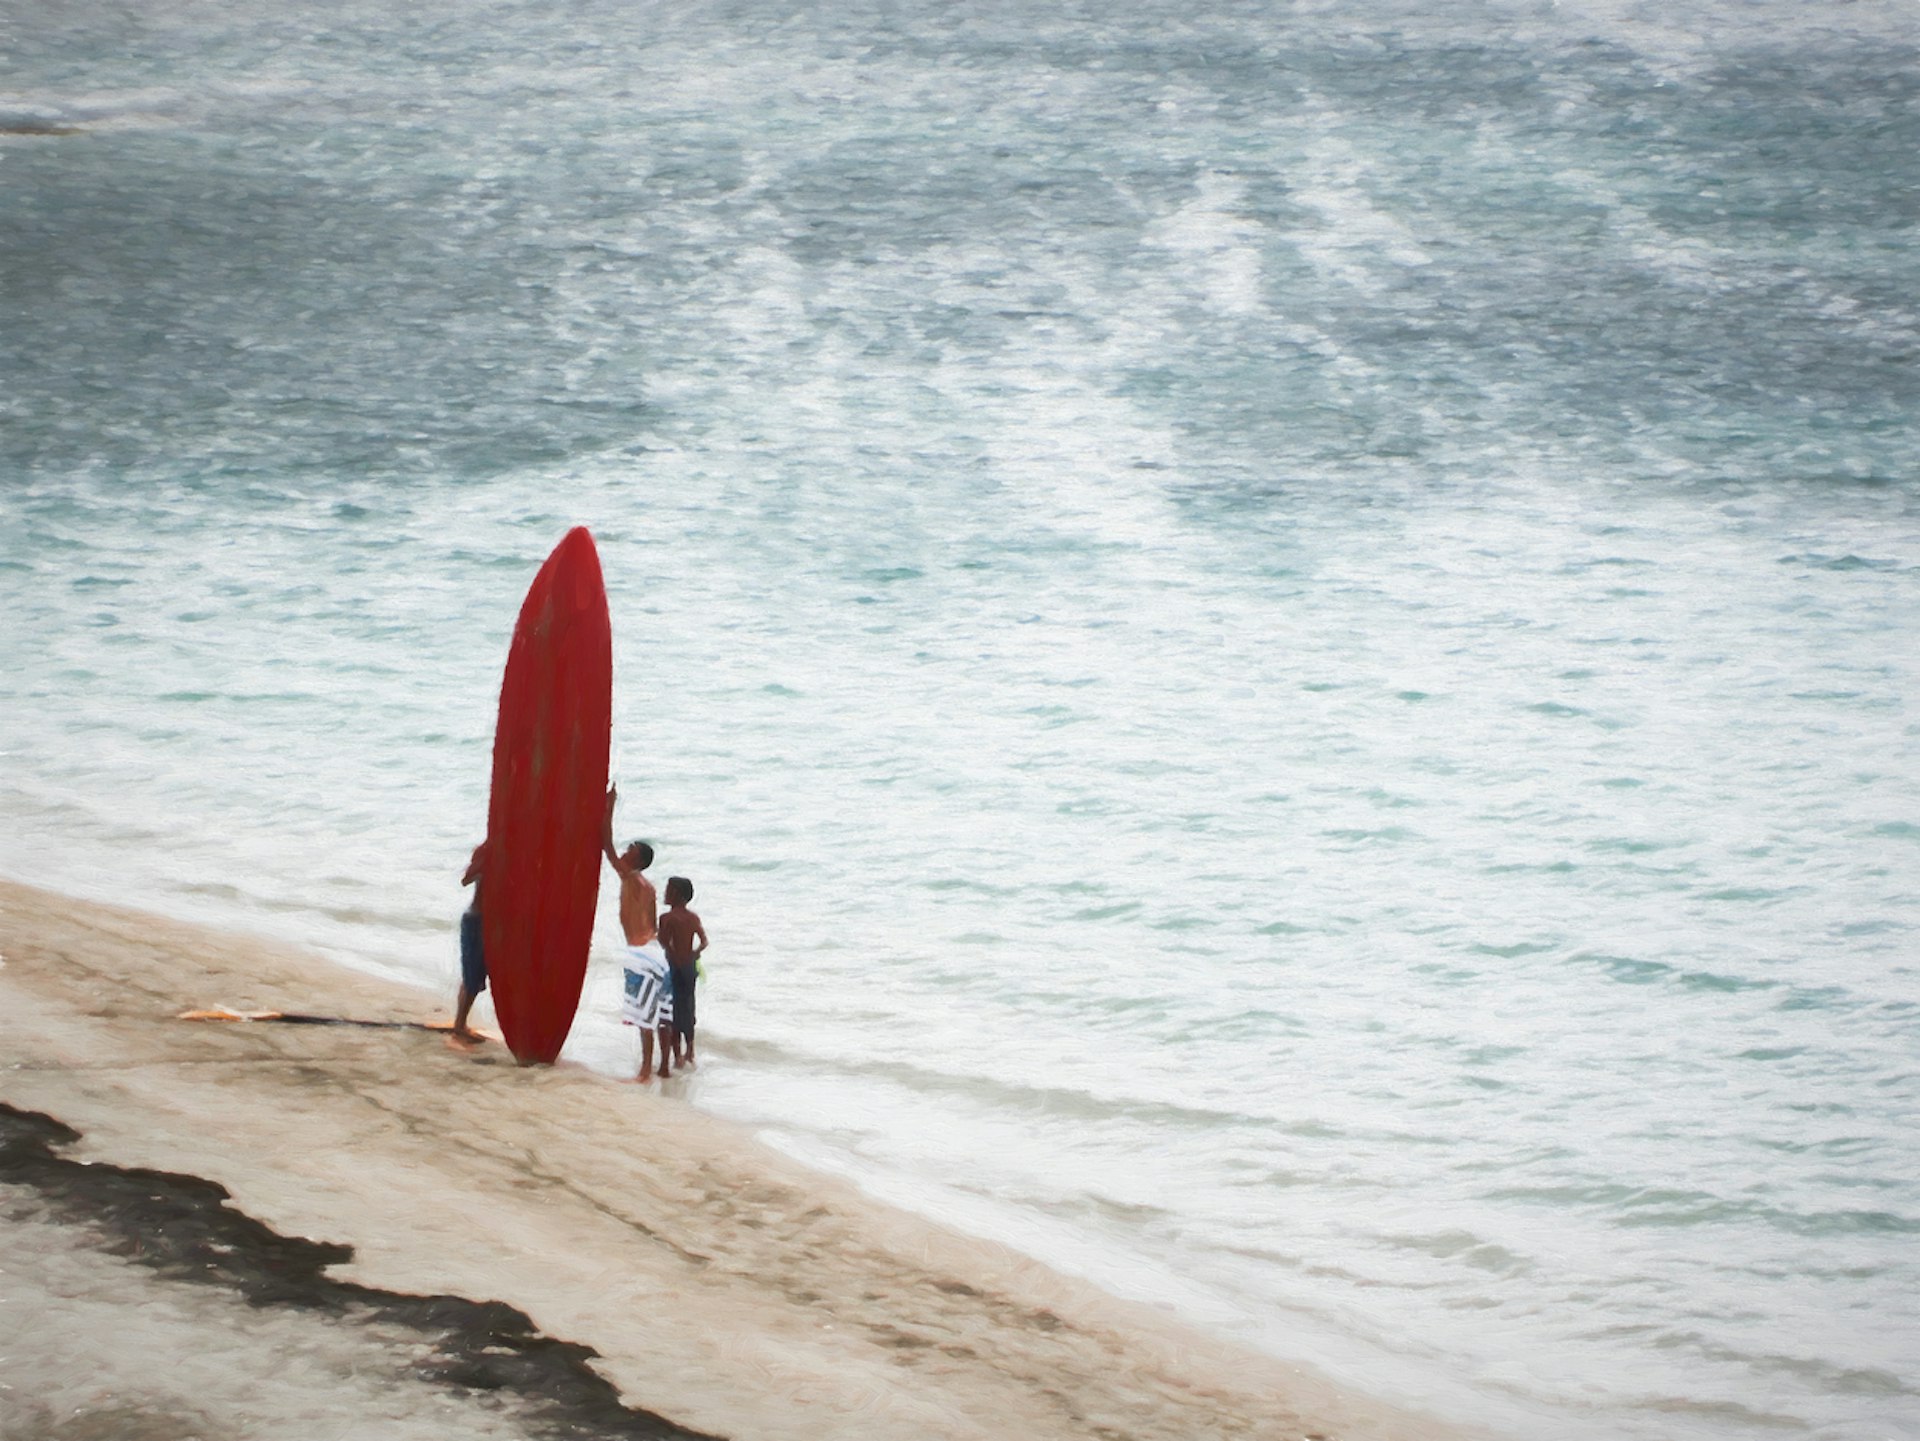 Children with a red surfboard at the beach